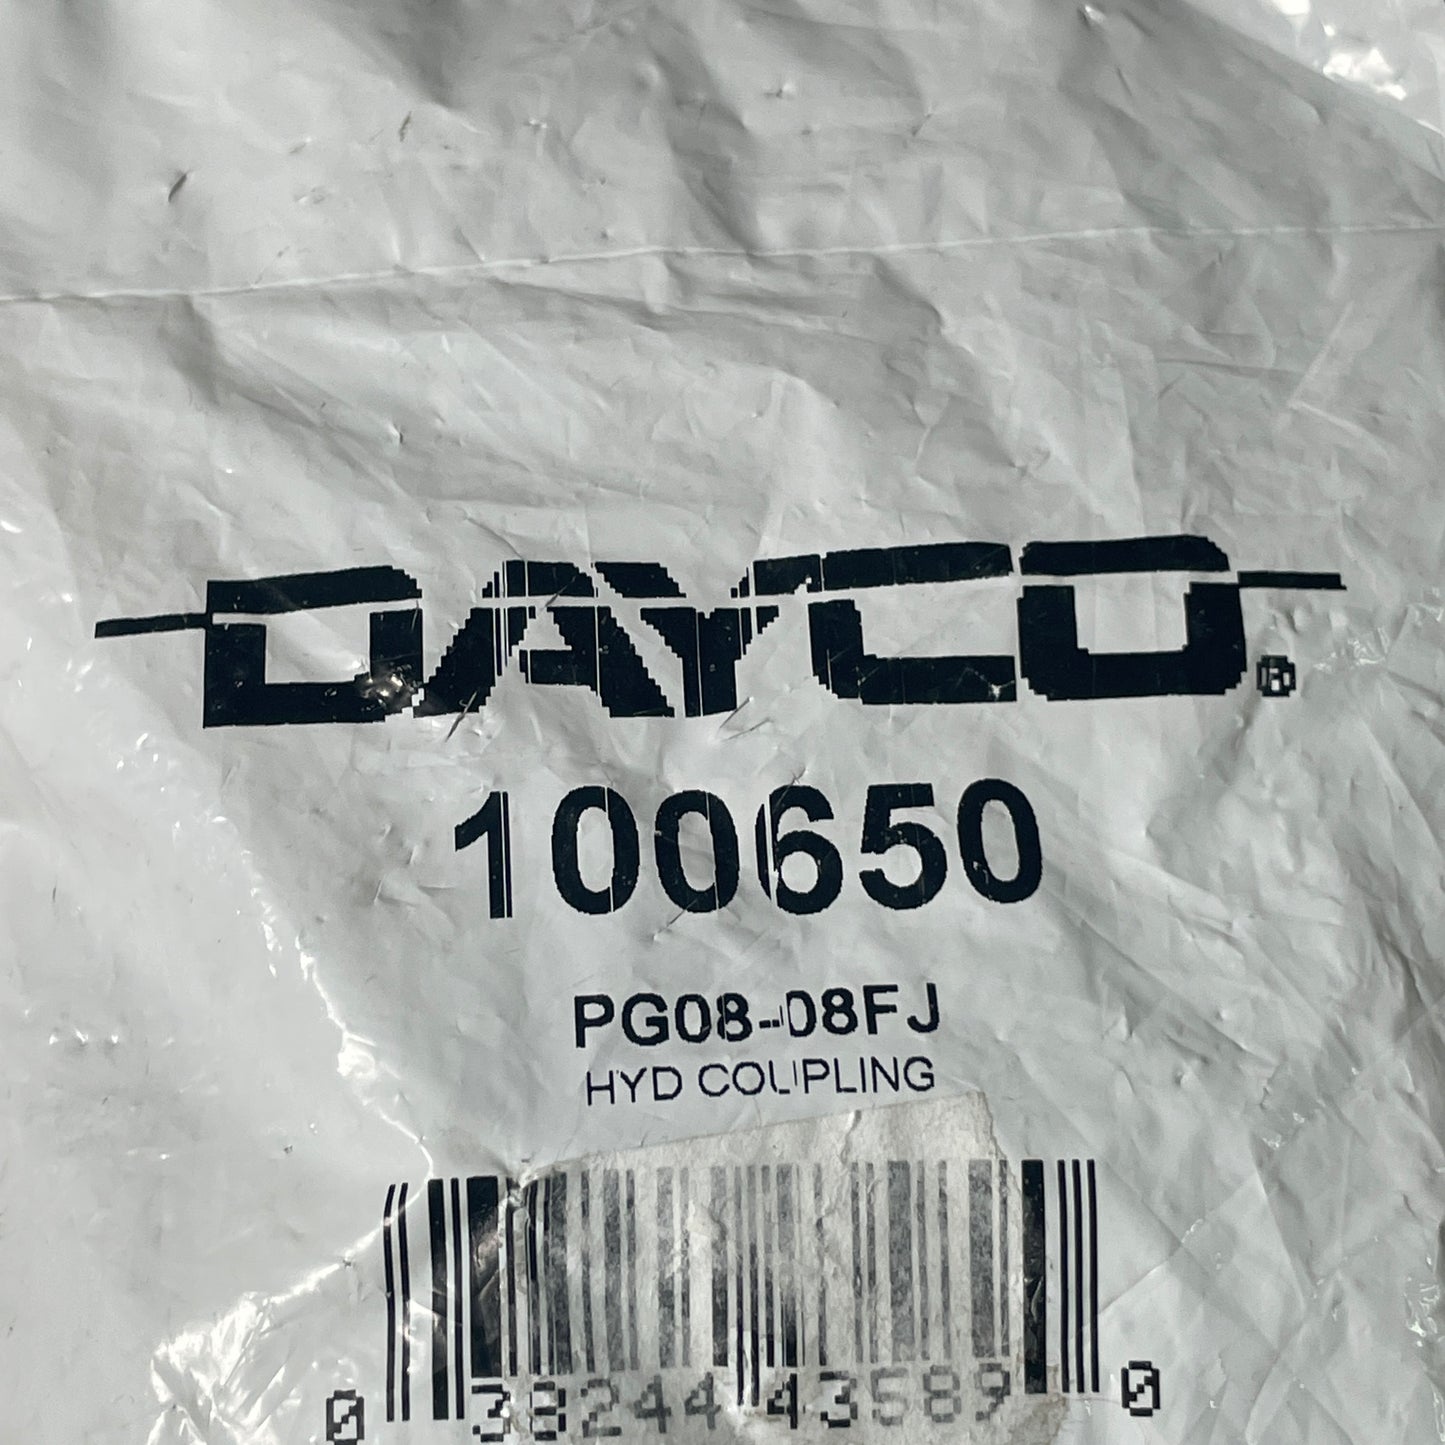 DAYCO Hydraulic Coupling Adapter 1/2" x 2.57" Steel Straight Female Swivel Permanent Crimp 100650 (New)